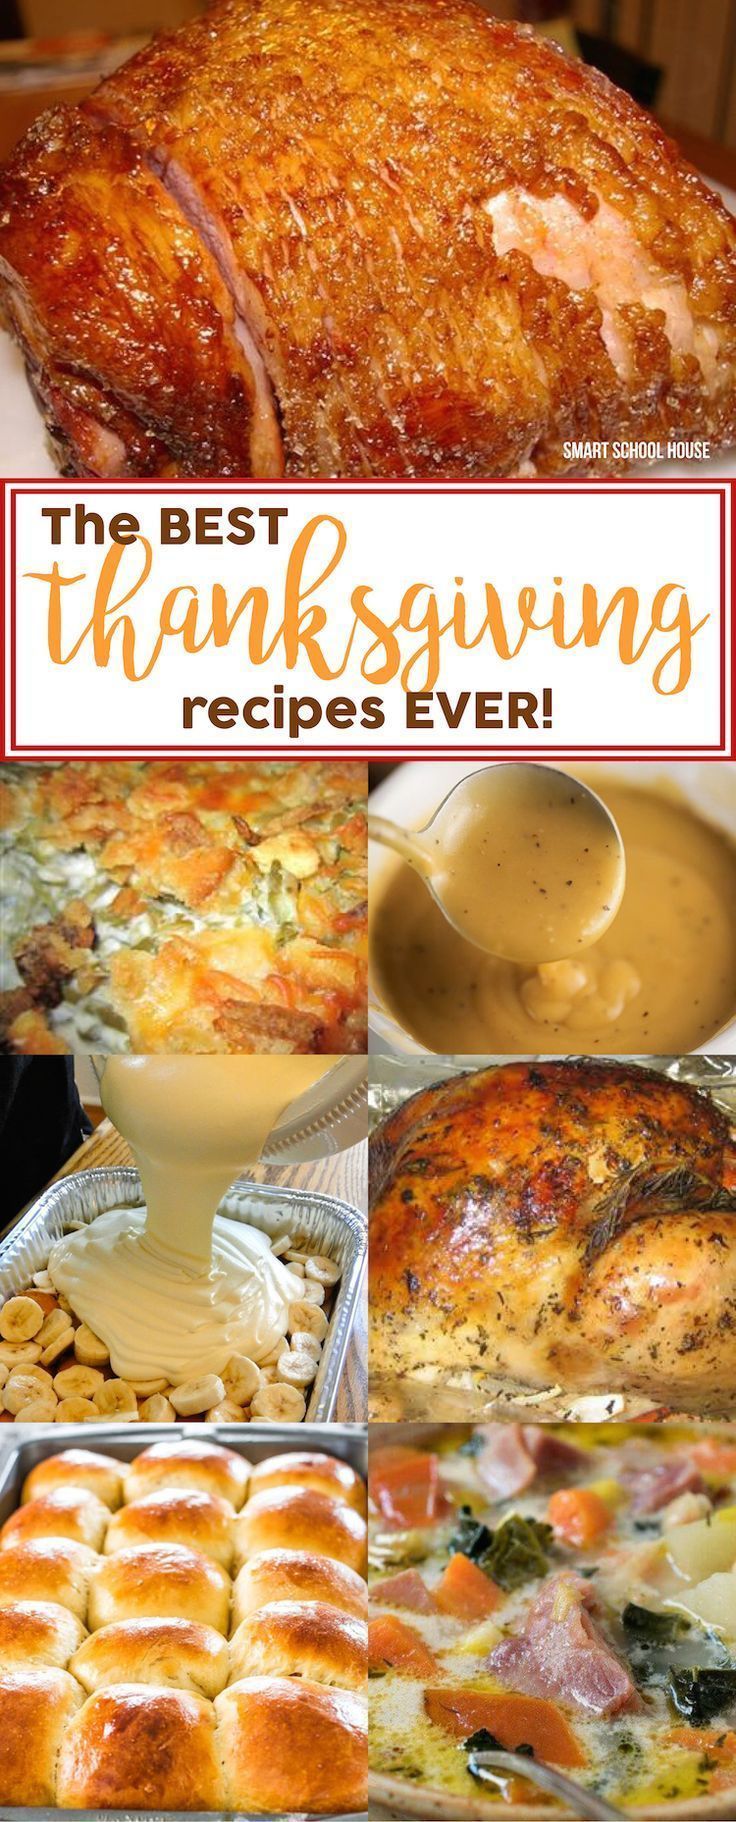 The BEST Thanksgiving recipes EVER! The best recipes for Thanksgiving turkey and stuffing, pumpkin pie, mashed potatoes, gravy,